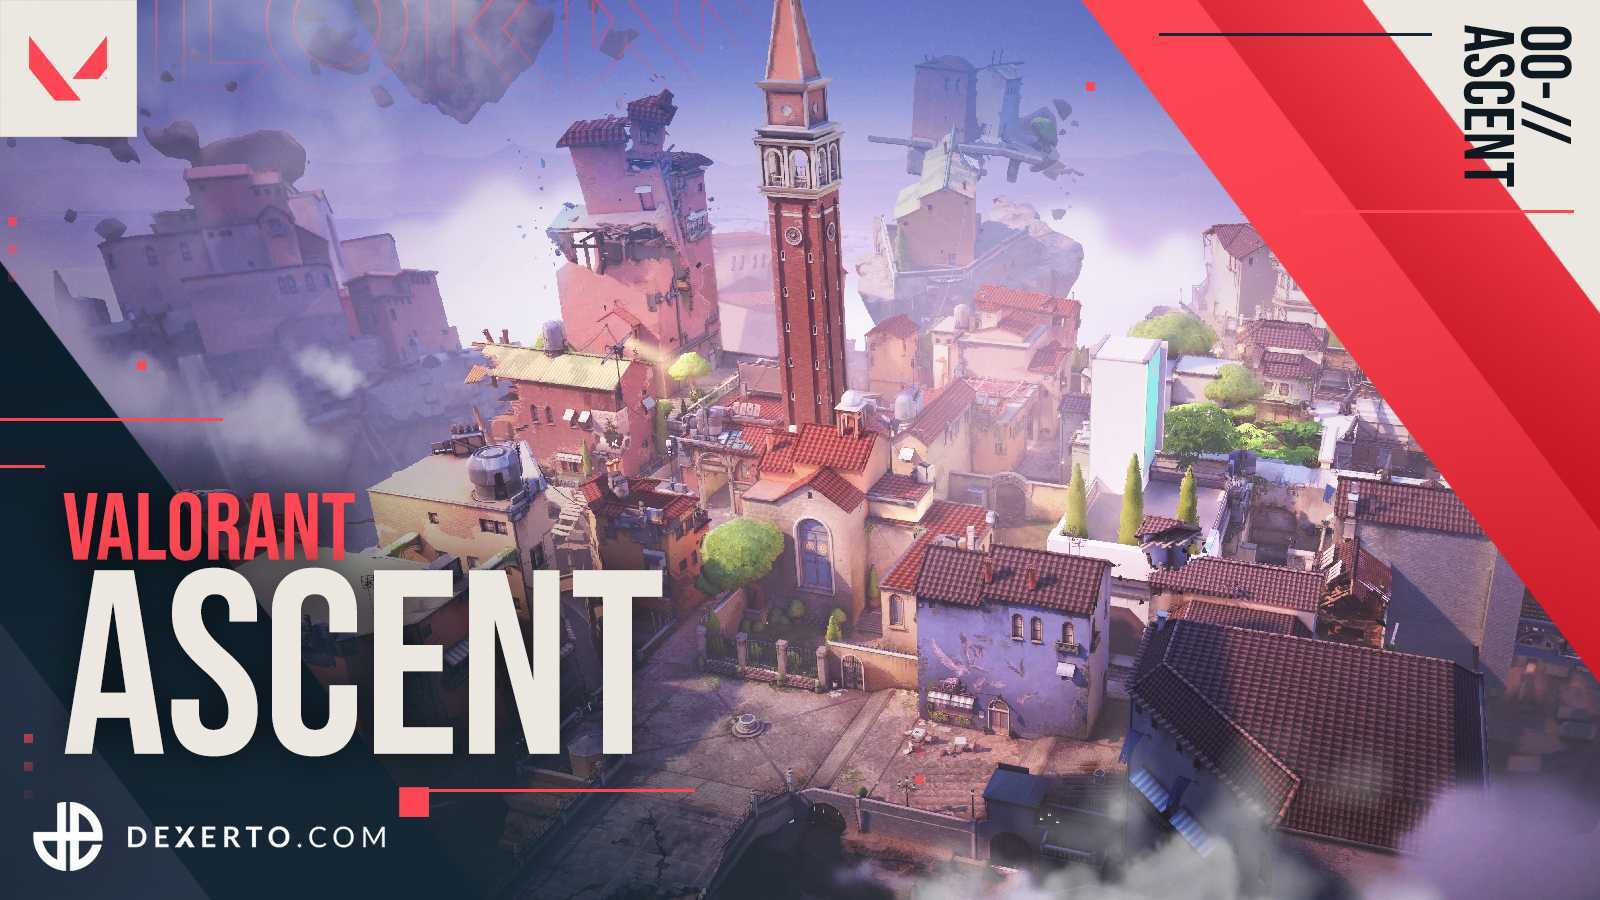 VALORANT Ascent map guide: Full layout, callouts, tips and tricks - Dot  Esports